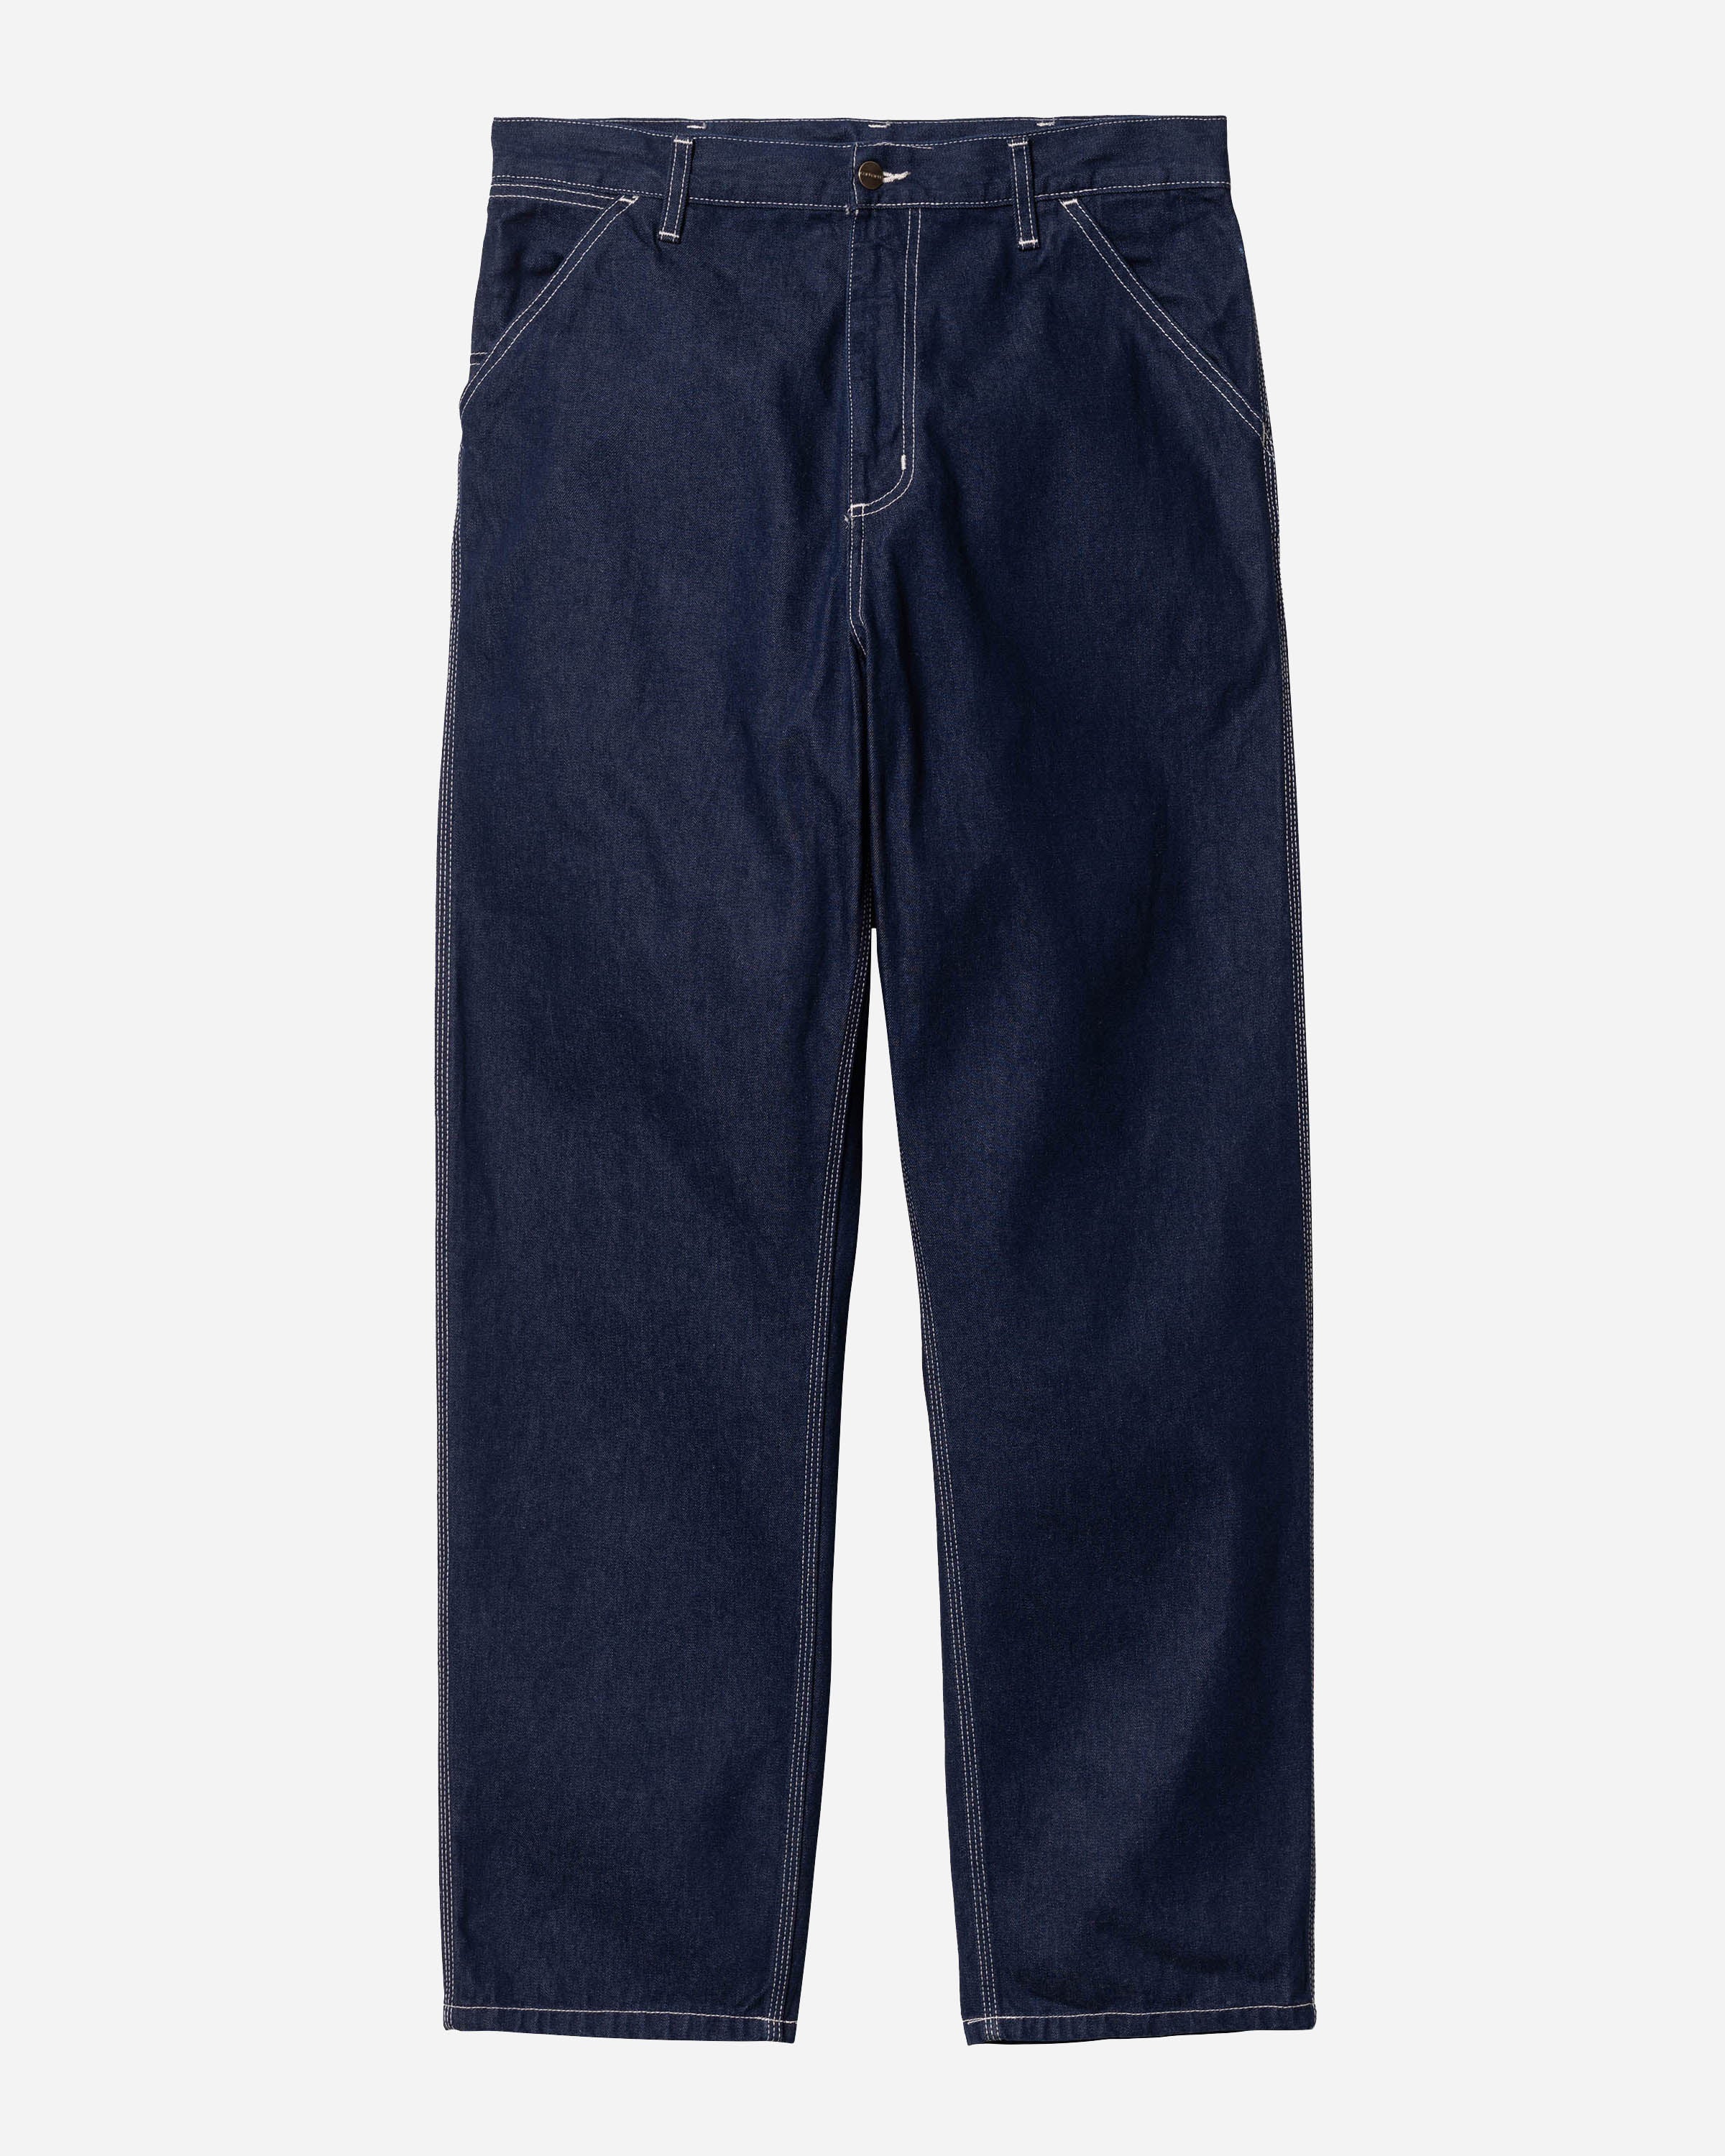 Simple Pant Blue One Wash image